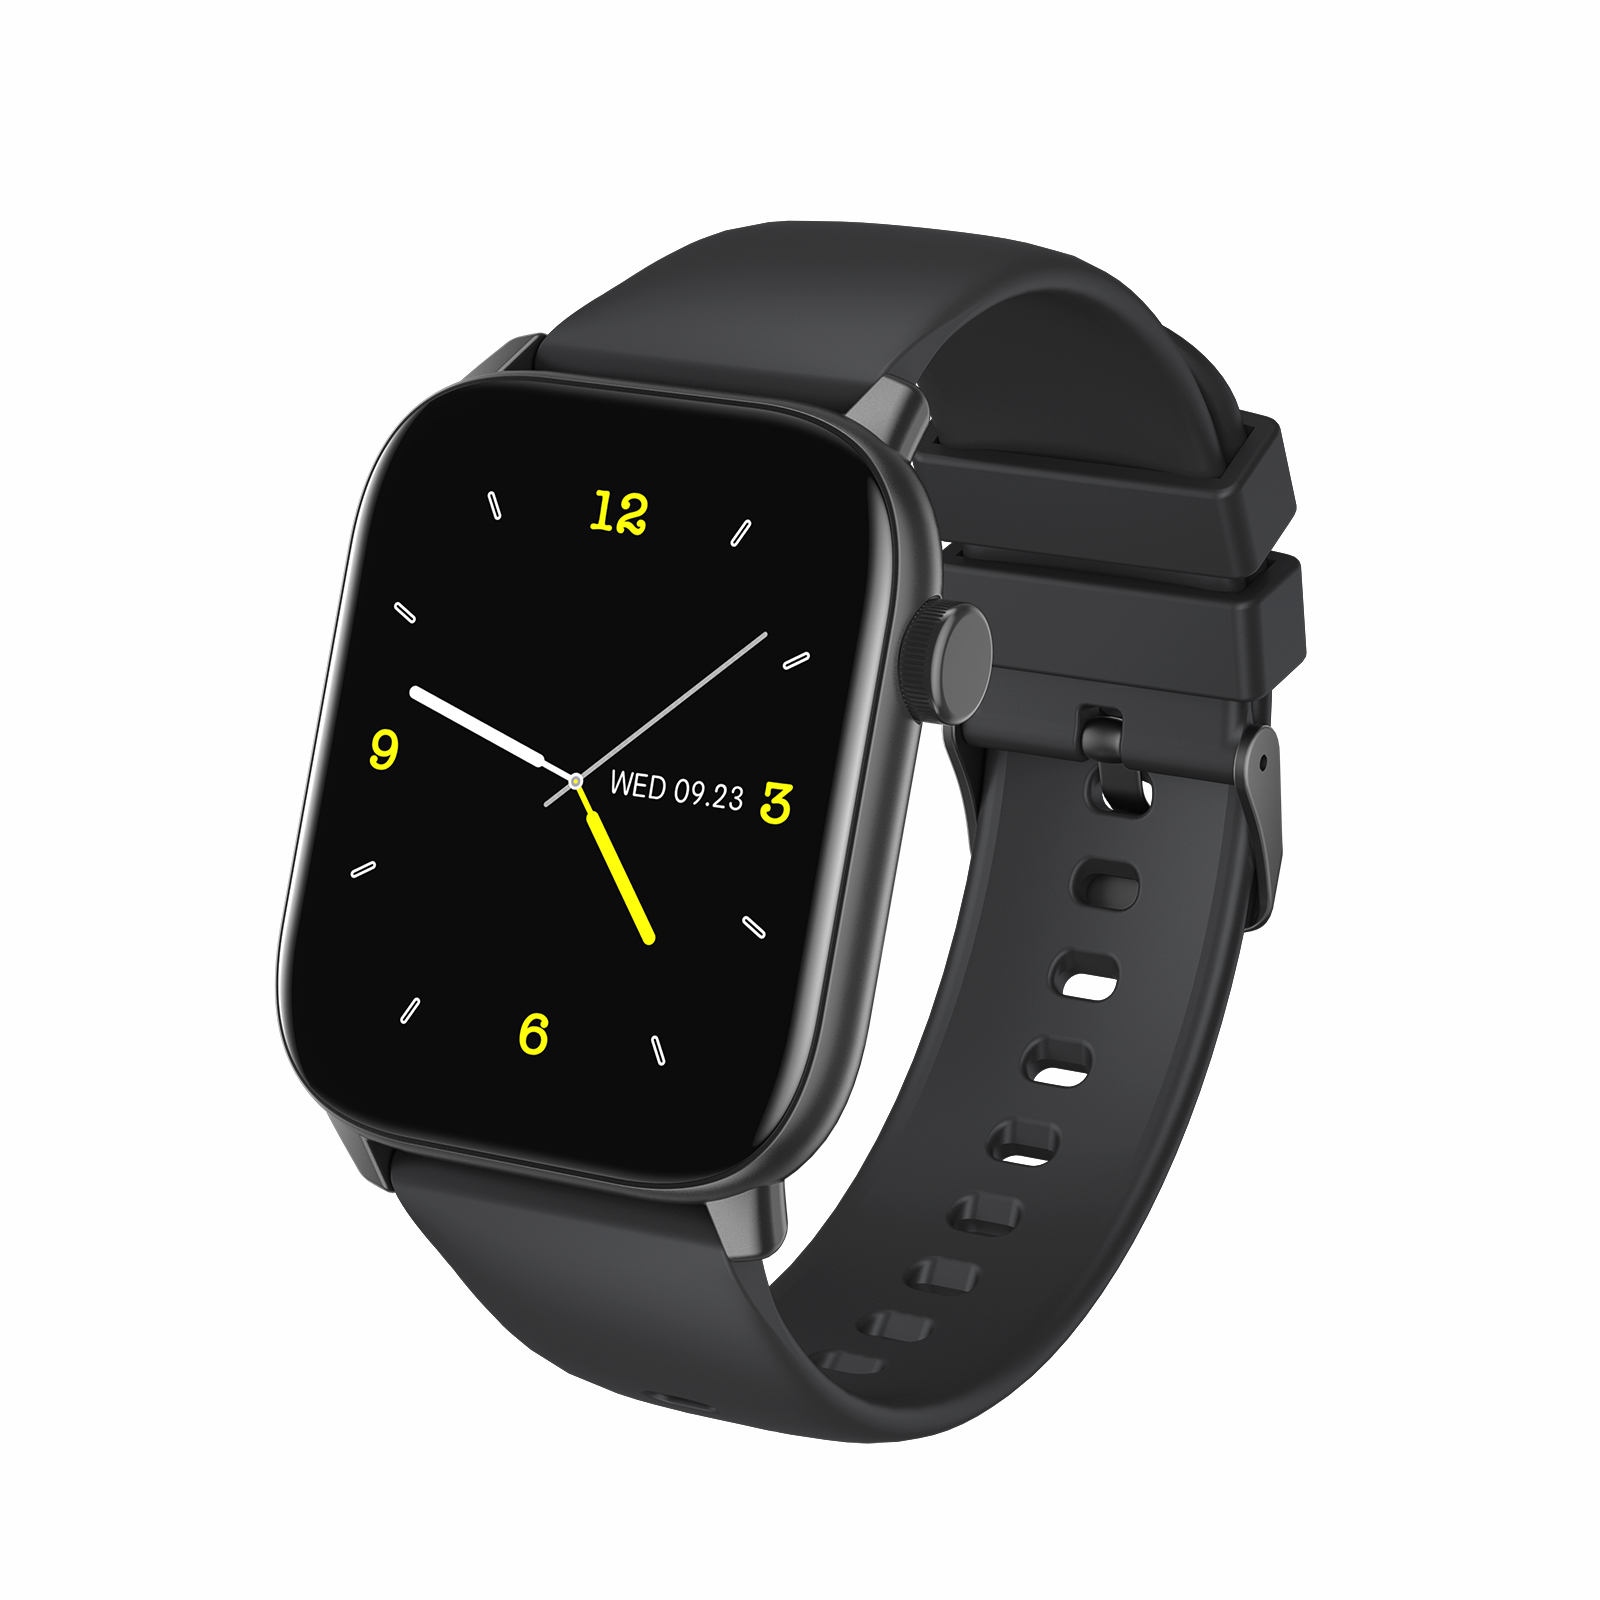 Large Full Touch Screen IP68 Waterproof Bt Music Control Smart Watch with HR Bpm SpO2 Kw76